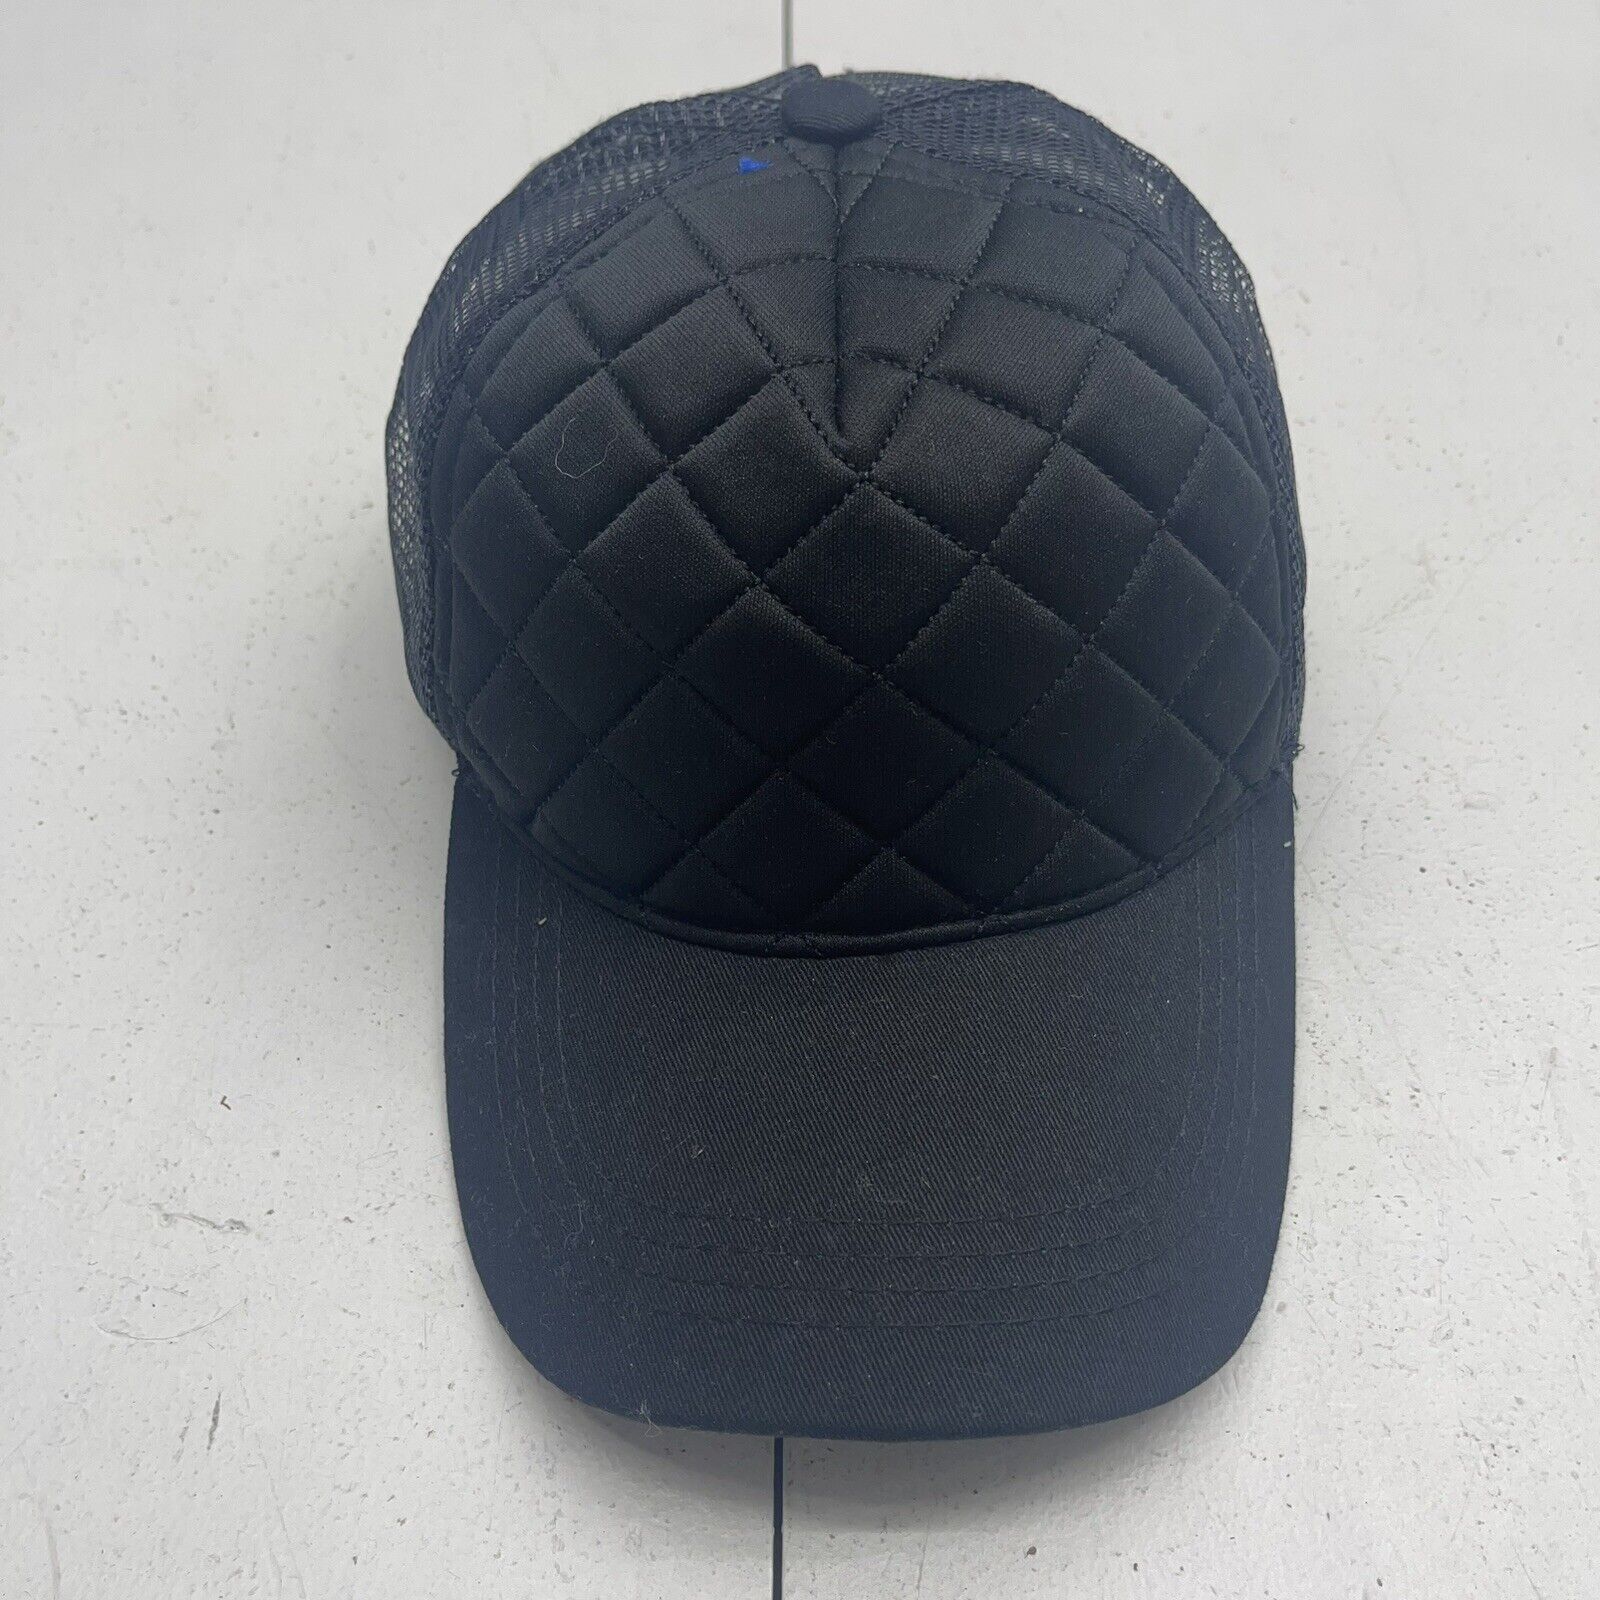 Black Quilted Mesh Trucker Hat Unisex Adults OS NWOT